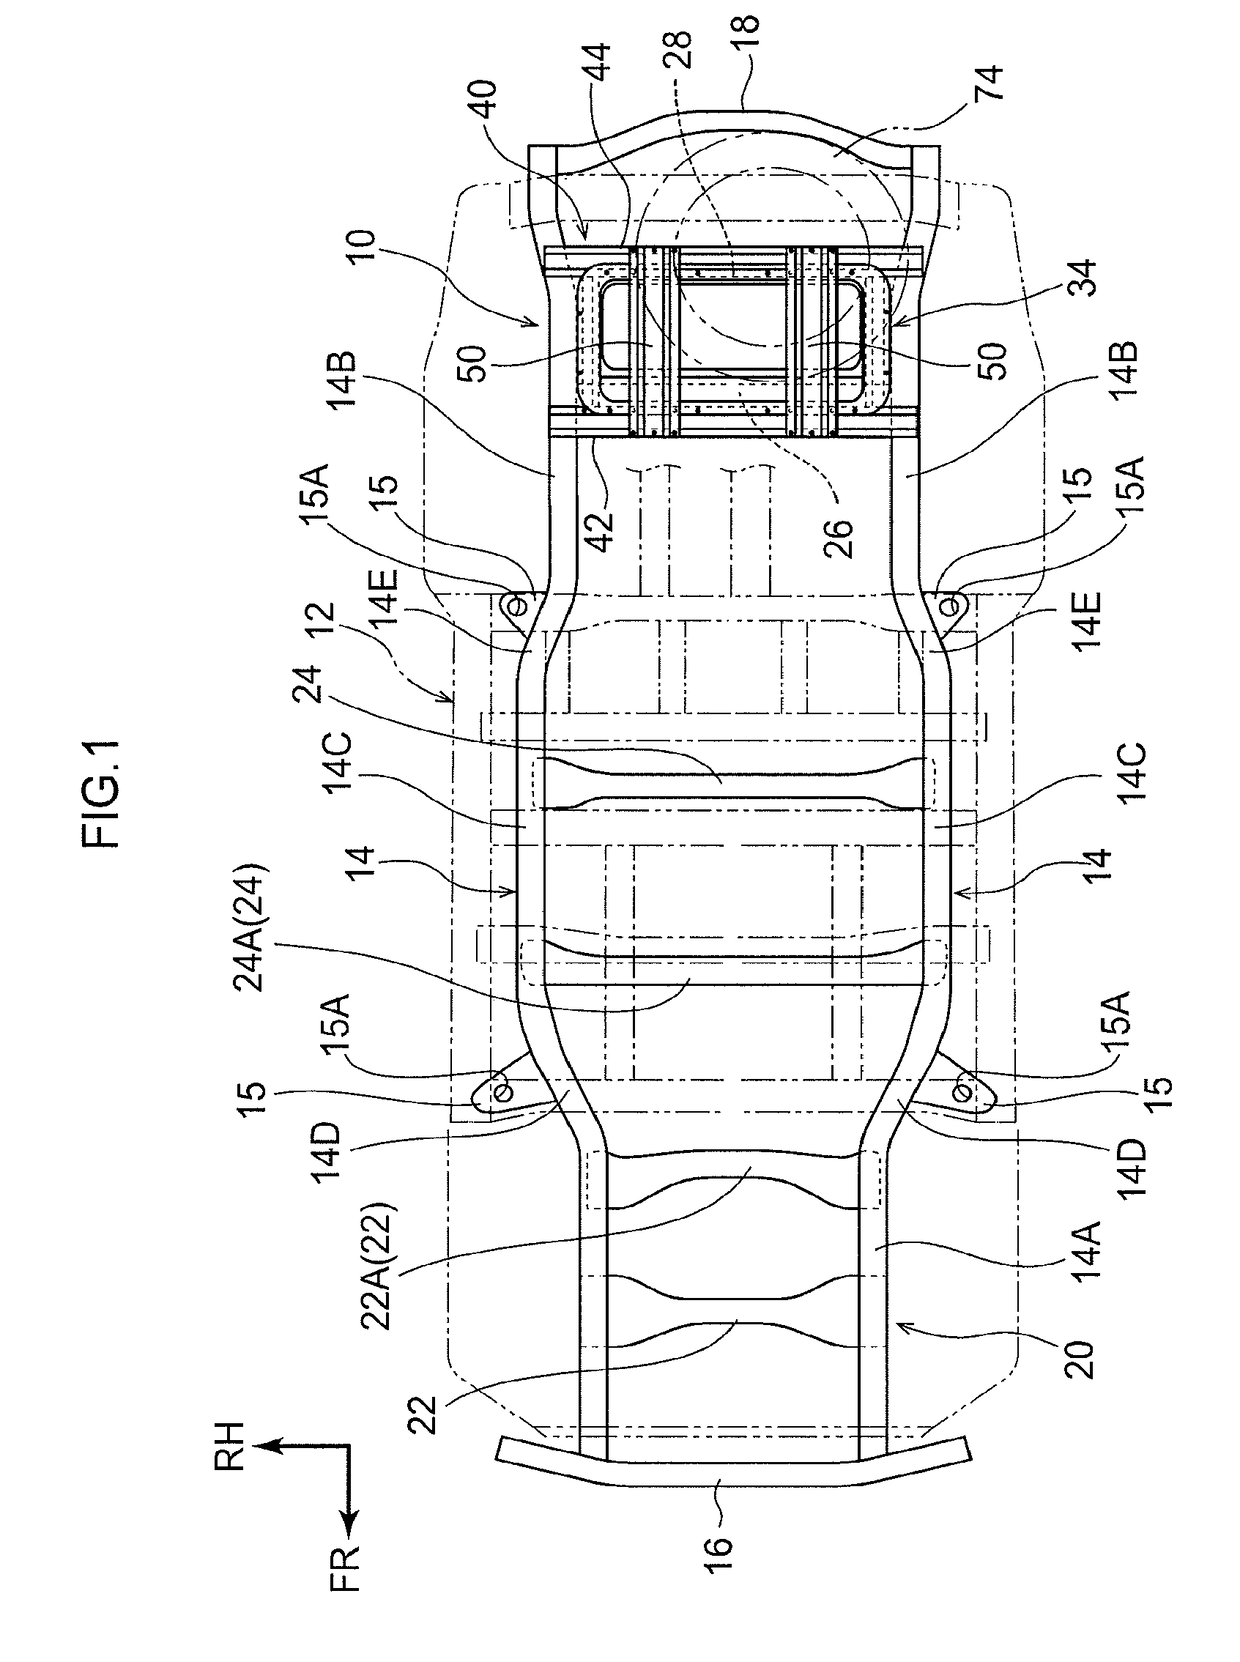 Framework structure of body-on-frame vehicle